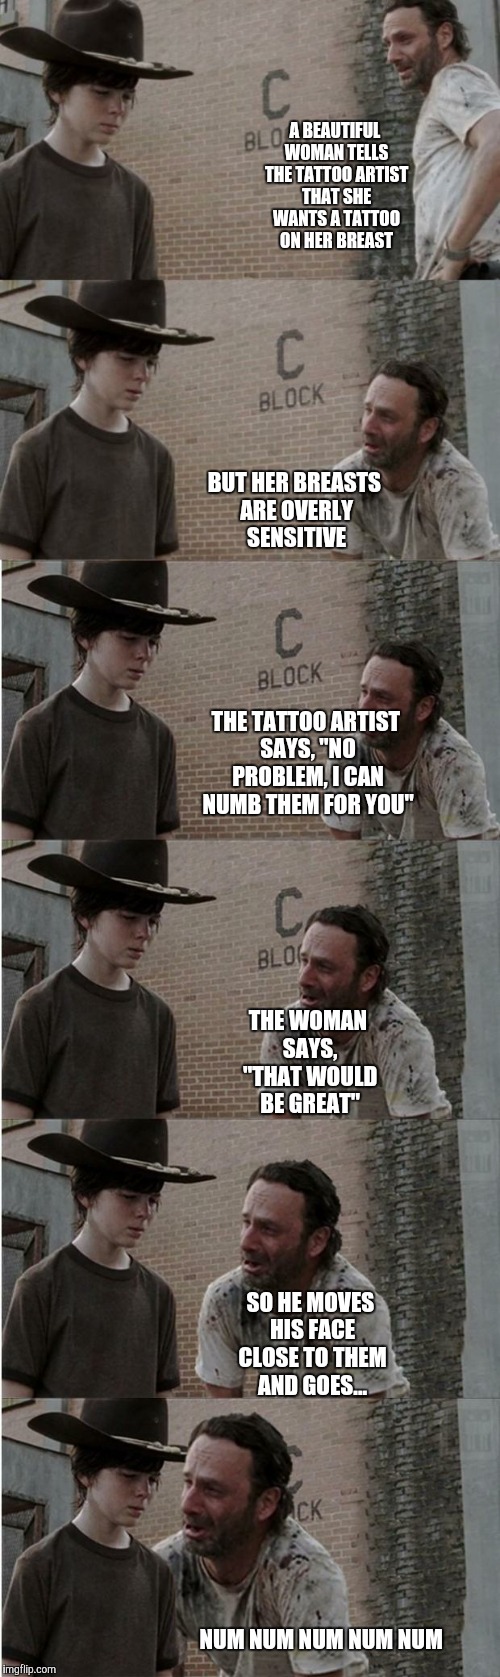 Hey coral... | A BEAUTIFUL WOMAN TELLS THE TATTOO ARTIST THAT SHE WANTS A TATTOO ON HER BREAST; BUT HER BREASTS ARE OVERLY SENSITIVE; THE TATTOO ARTIST SAYS, "NO PROBLEM, I CAN NUMB THEM FOR YOU"; THE WOMAN SAYS, "THAT WOULD BE GREAT"; SO HE MOVES HIS FACE CLOSE TO THEM AND GOES... NUM NUM NUM NUM NUM | image tagged in memes,rick and carl longer | made w/ Imgflip meme maker